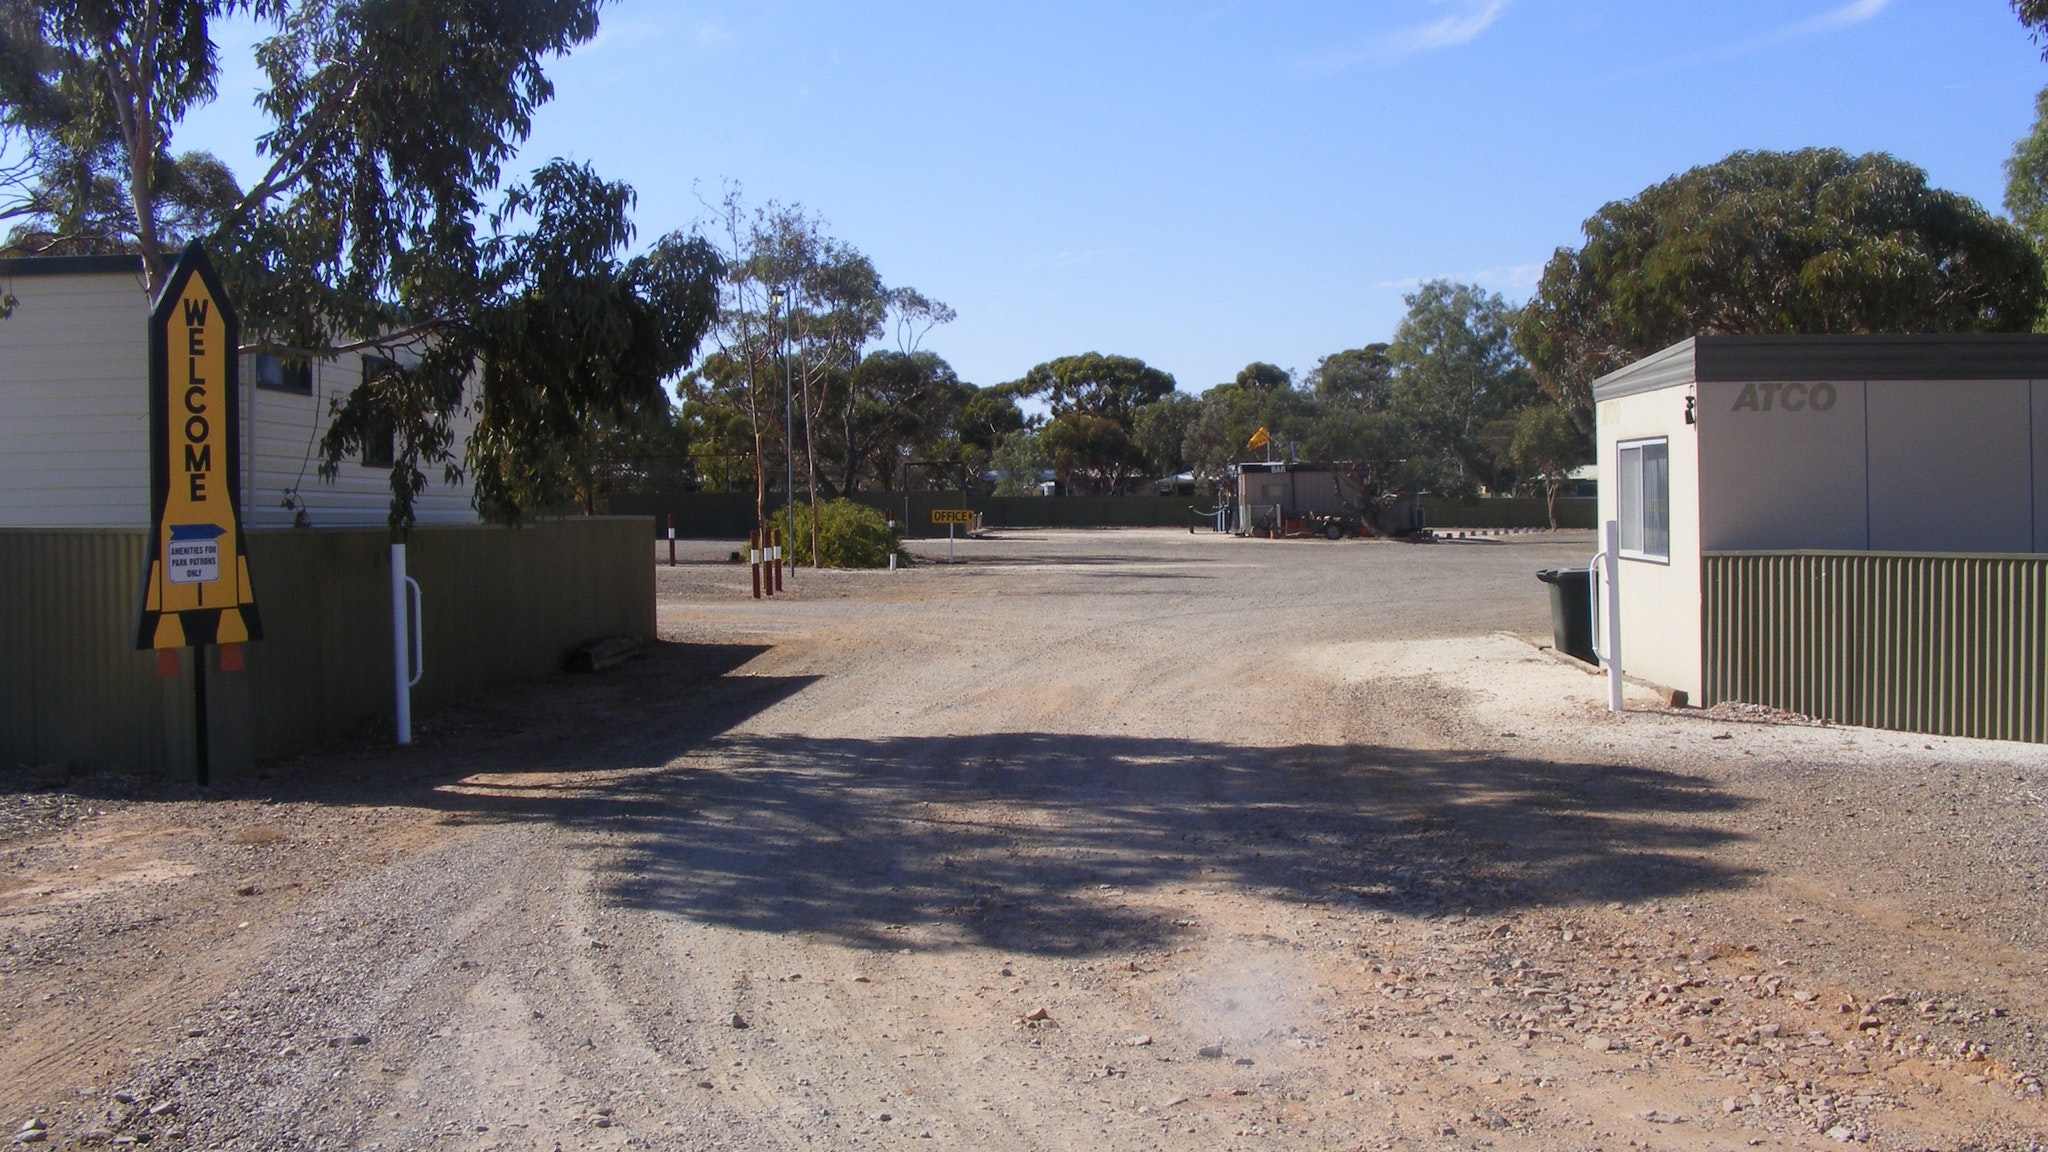 Woomera Traveller's Village and Caravan Park - Coogee Beach Accommodation